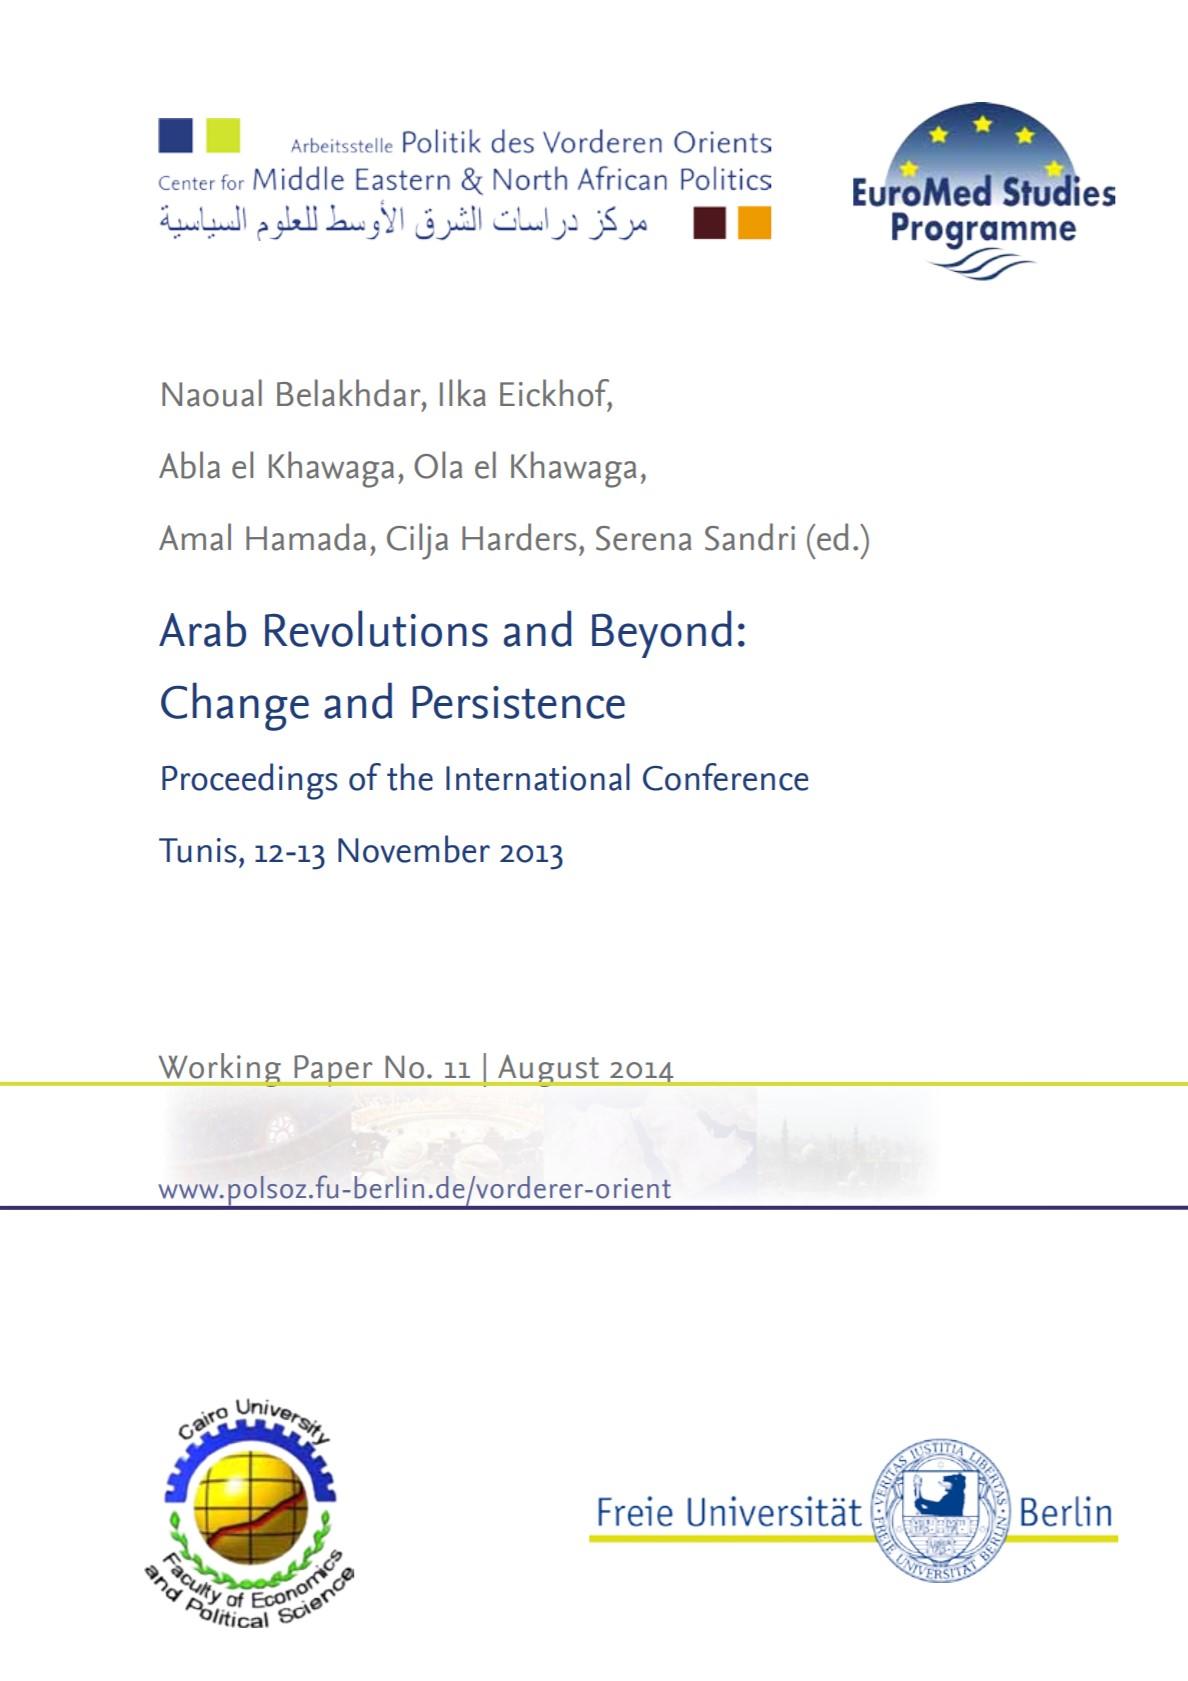 Arab Revolutions and Beyond. Proceedings of the International Conference. Tunis, 12-13 November 2013